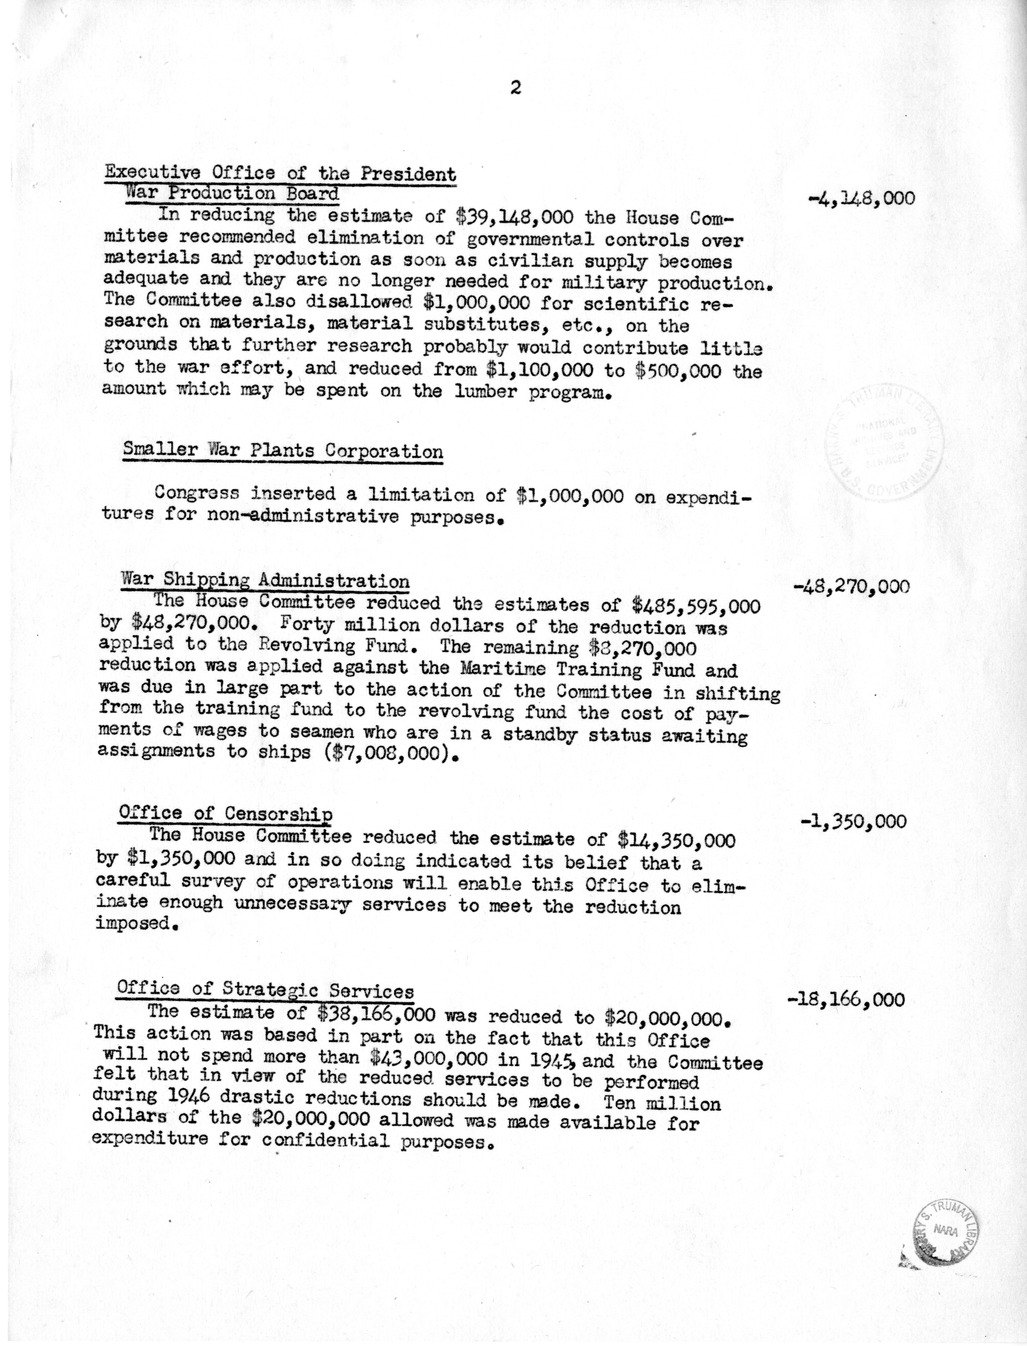 Memorandum from Harold D. Smith to M. C. Latta, H.R. 3368, Making Appropriations for War Agencies for the Fiscal Year Ending June 30, 1946, and for Other Purposes, with Attachments